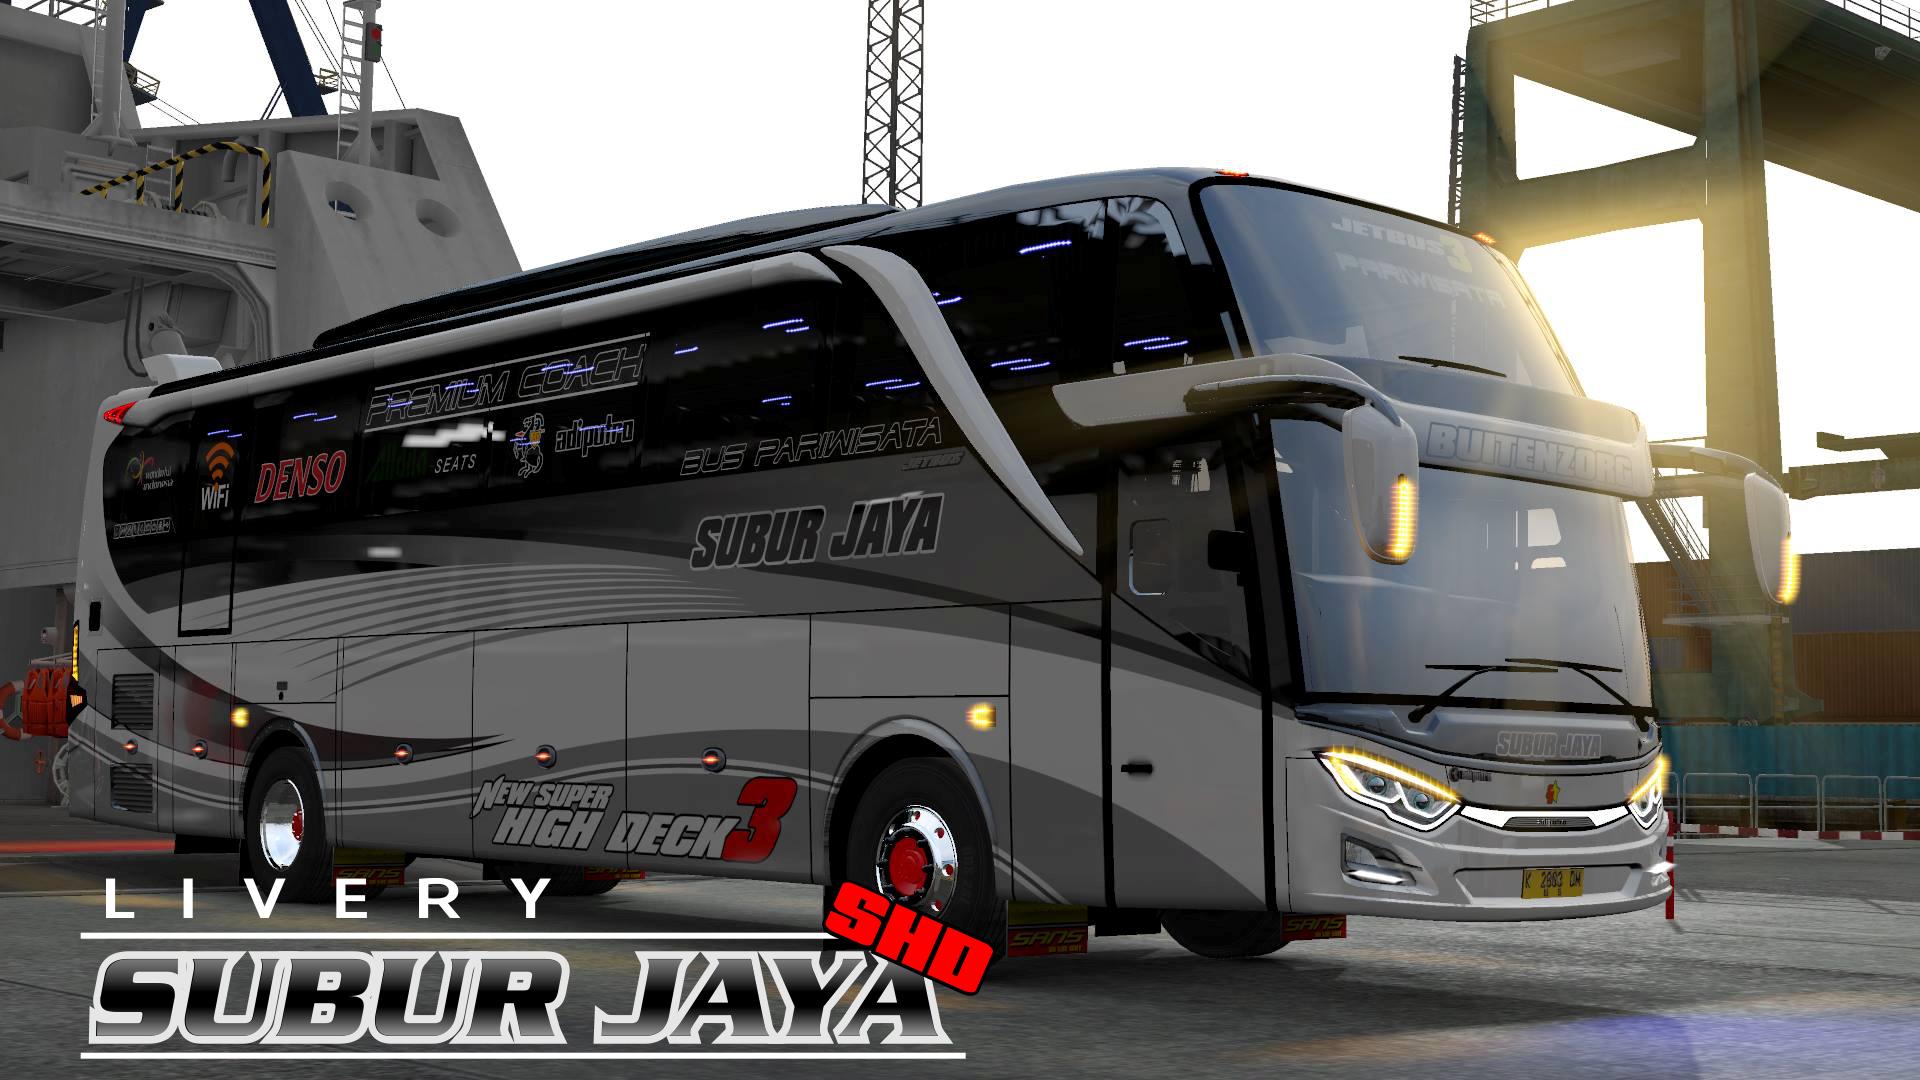 Livery SHD Subur Jaya for Android - APK Download